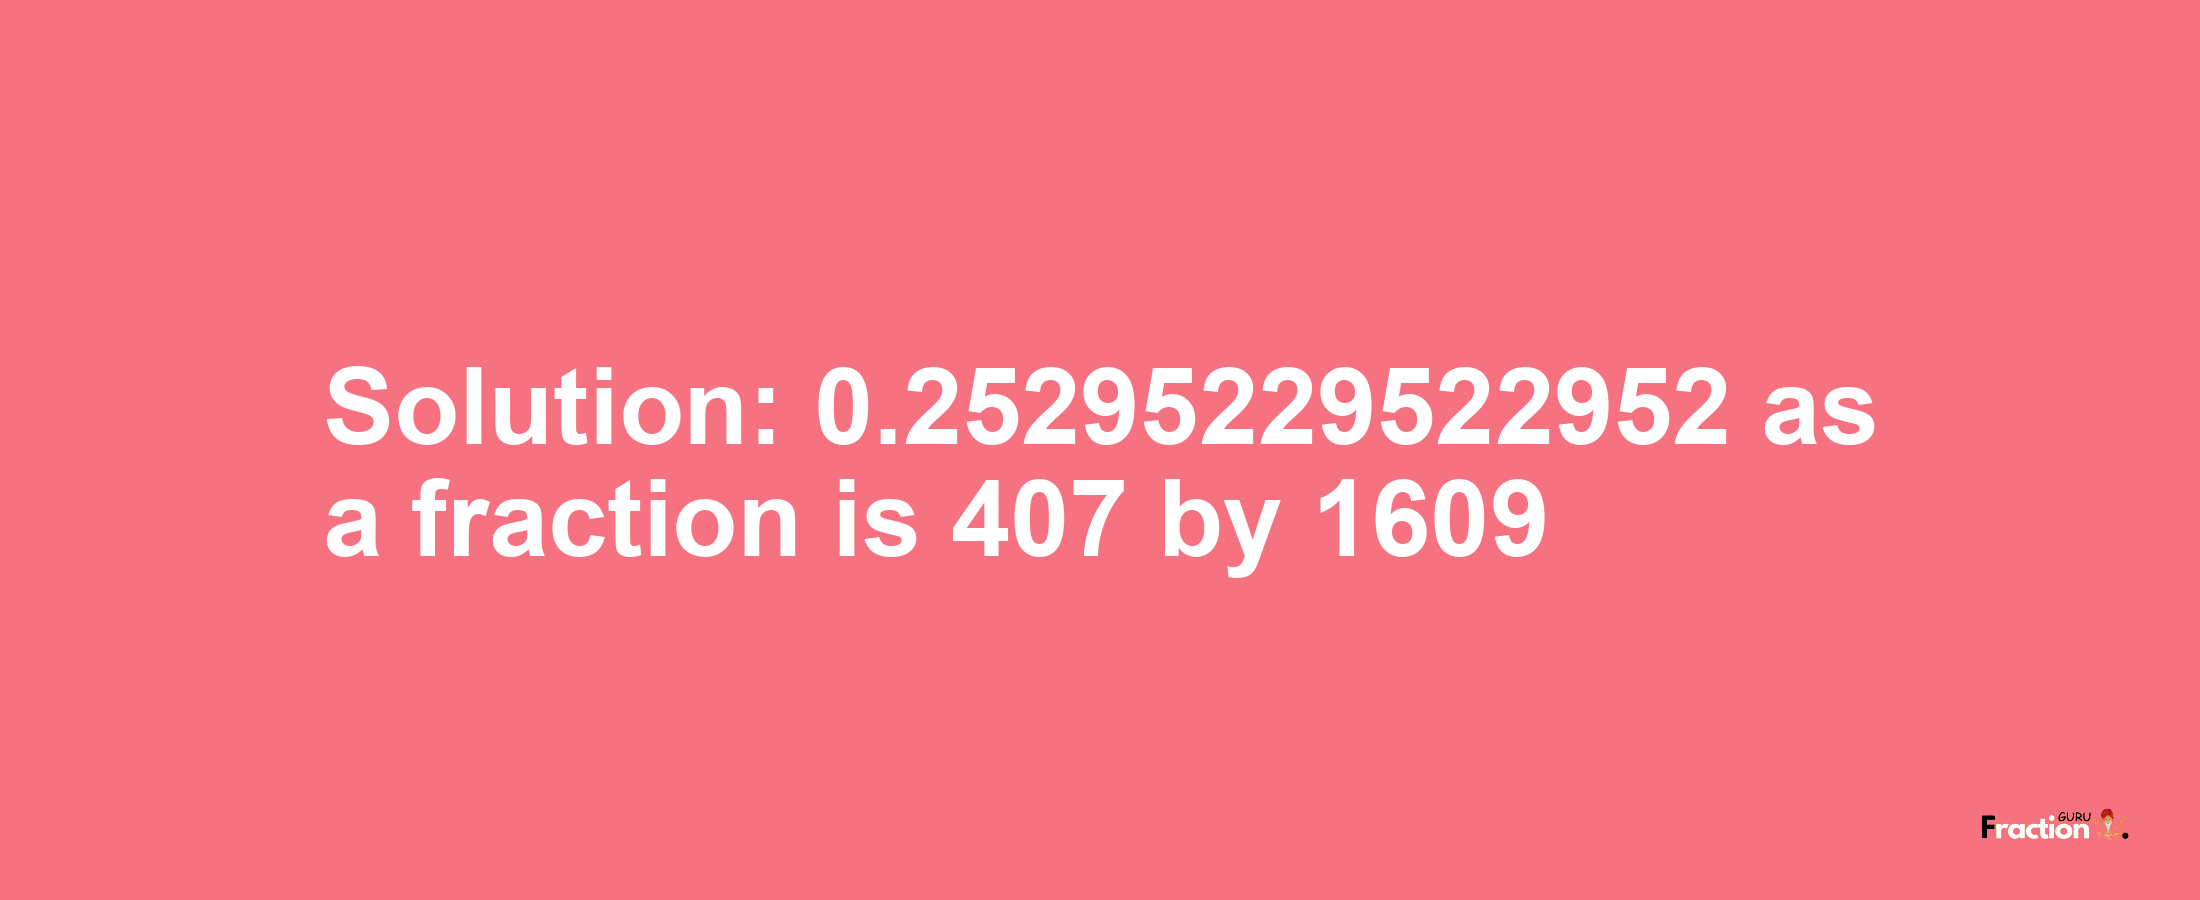 Solution:0.25295229522952 as a fraction is 407/1609